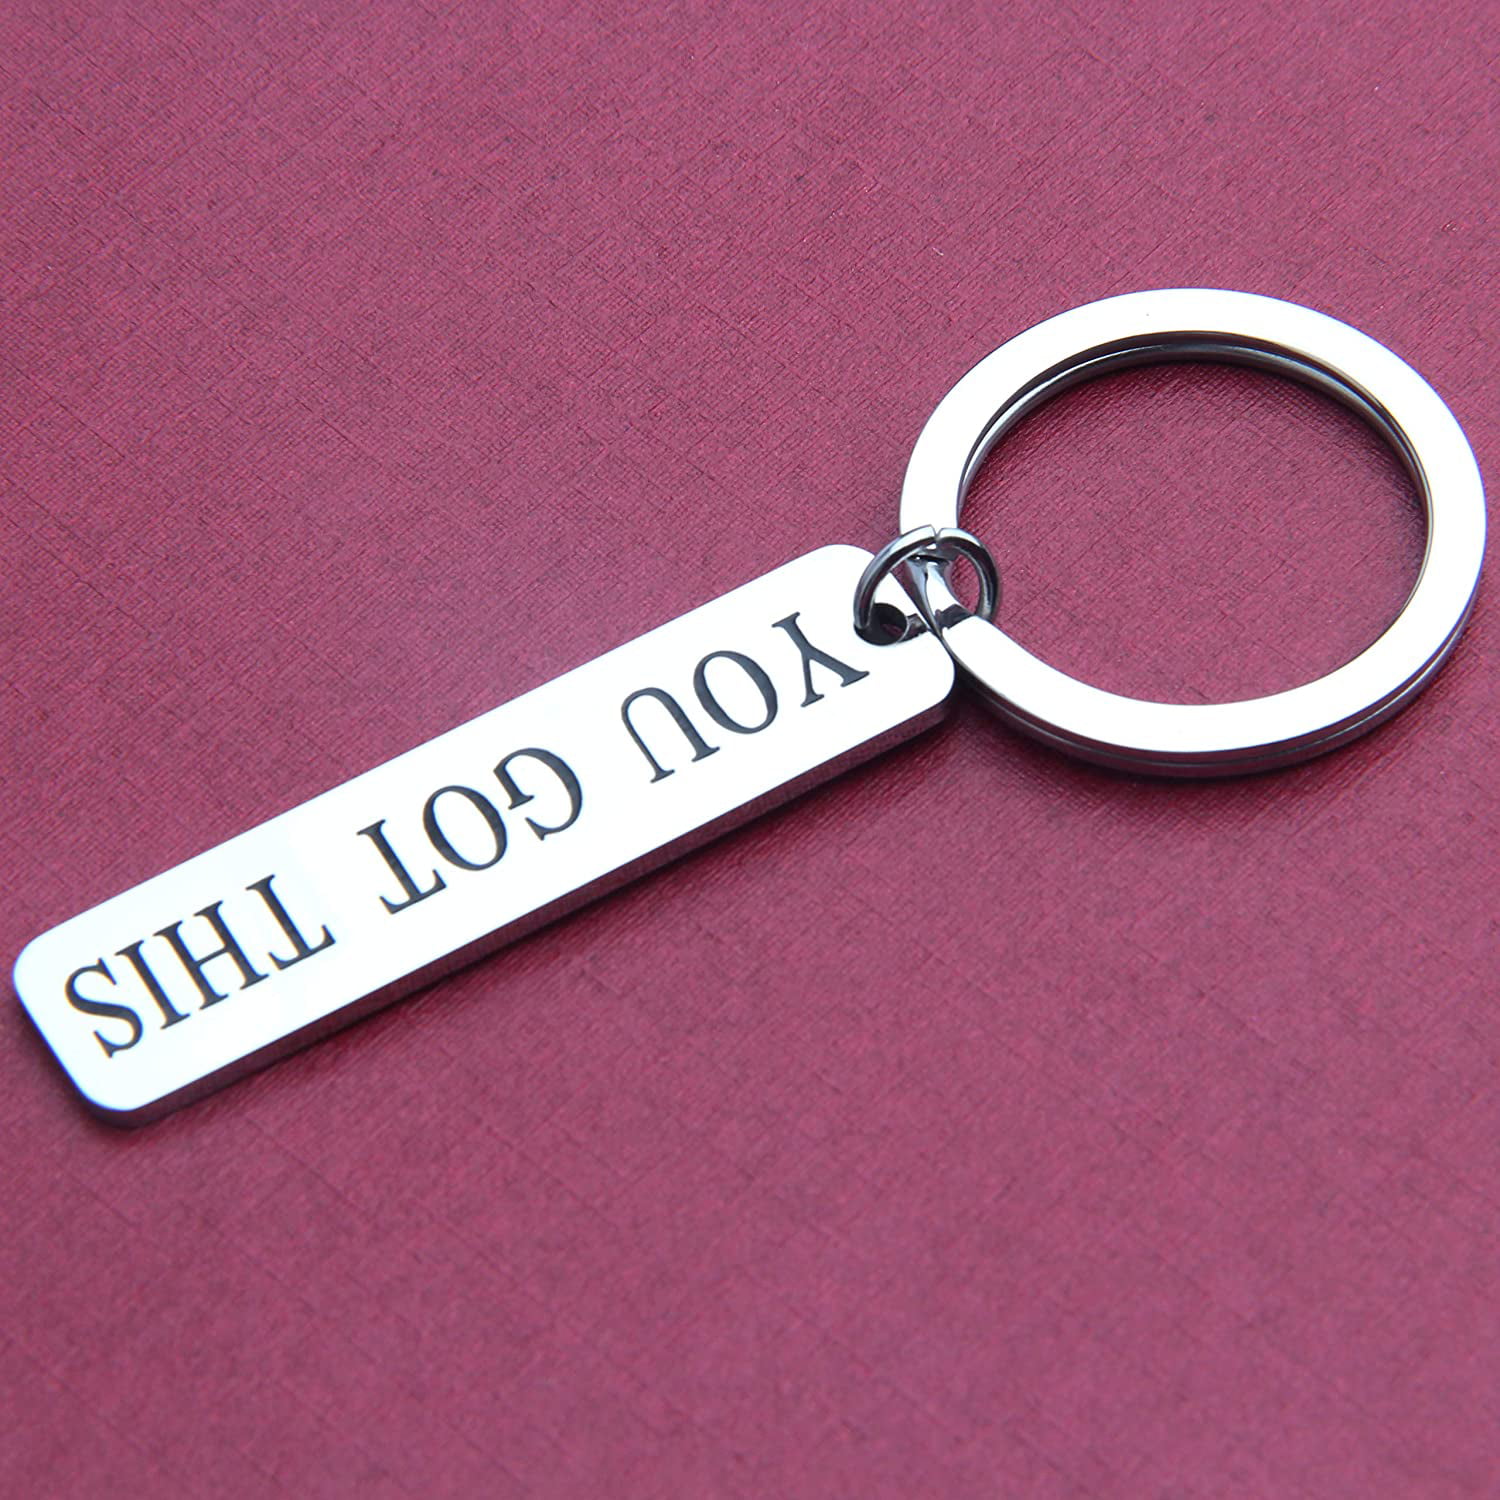 BNQL You Got This Keychain Positive Quote Uplifting Key Chain Recovery Gift 